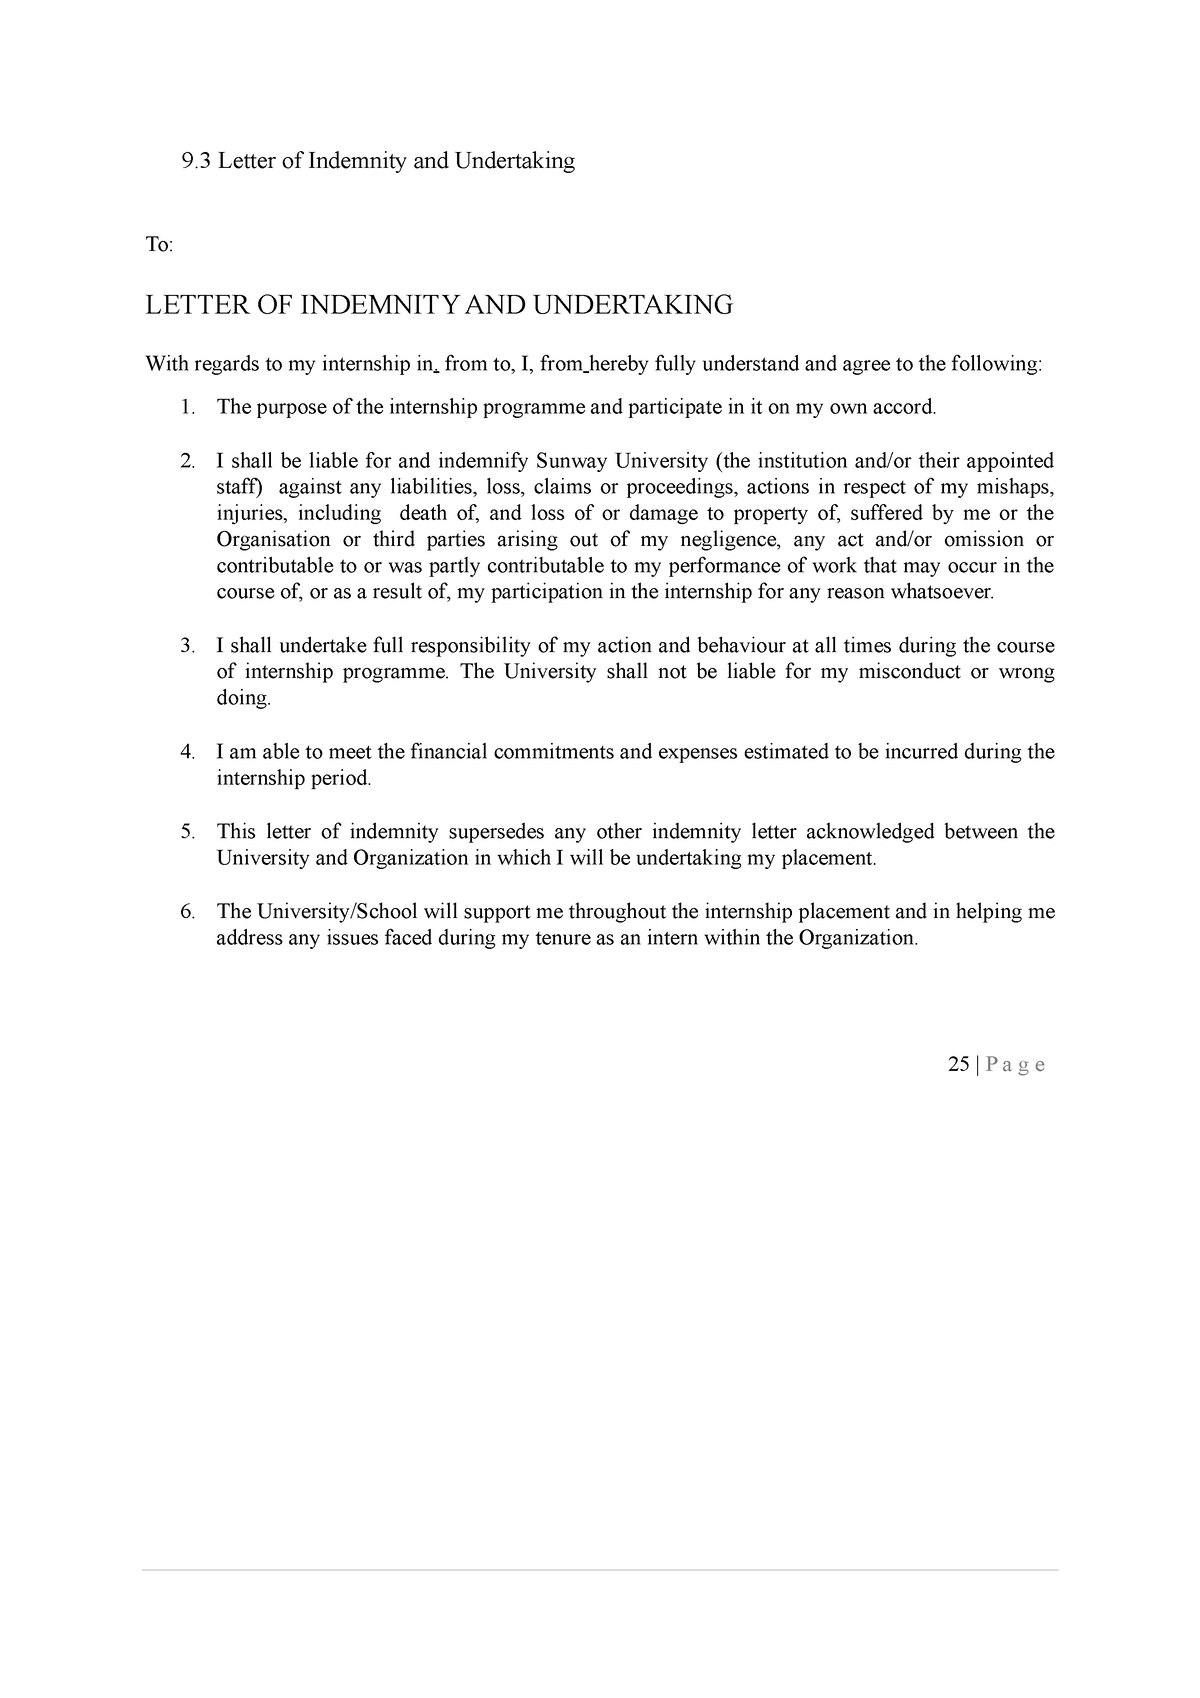 Letter Of Indemnity 0 Undertaking 2022 9 Letter Of Indemnity And Undertaking To Letter Of 7596